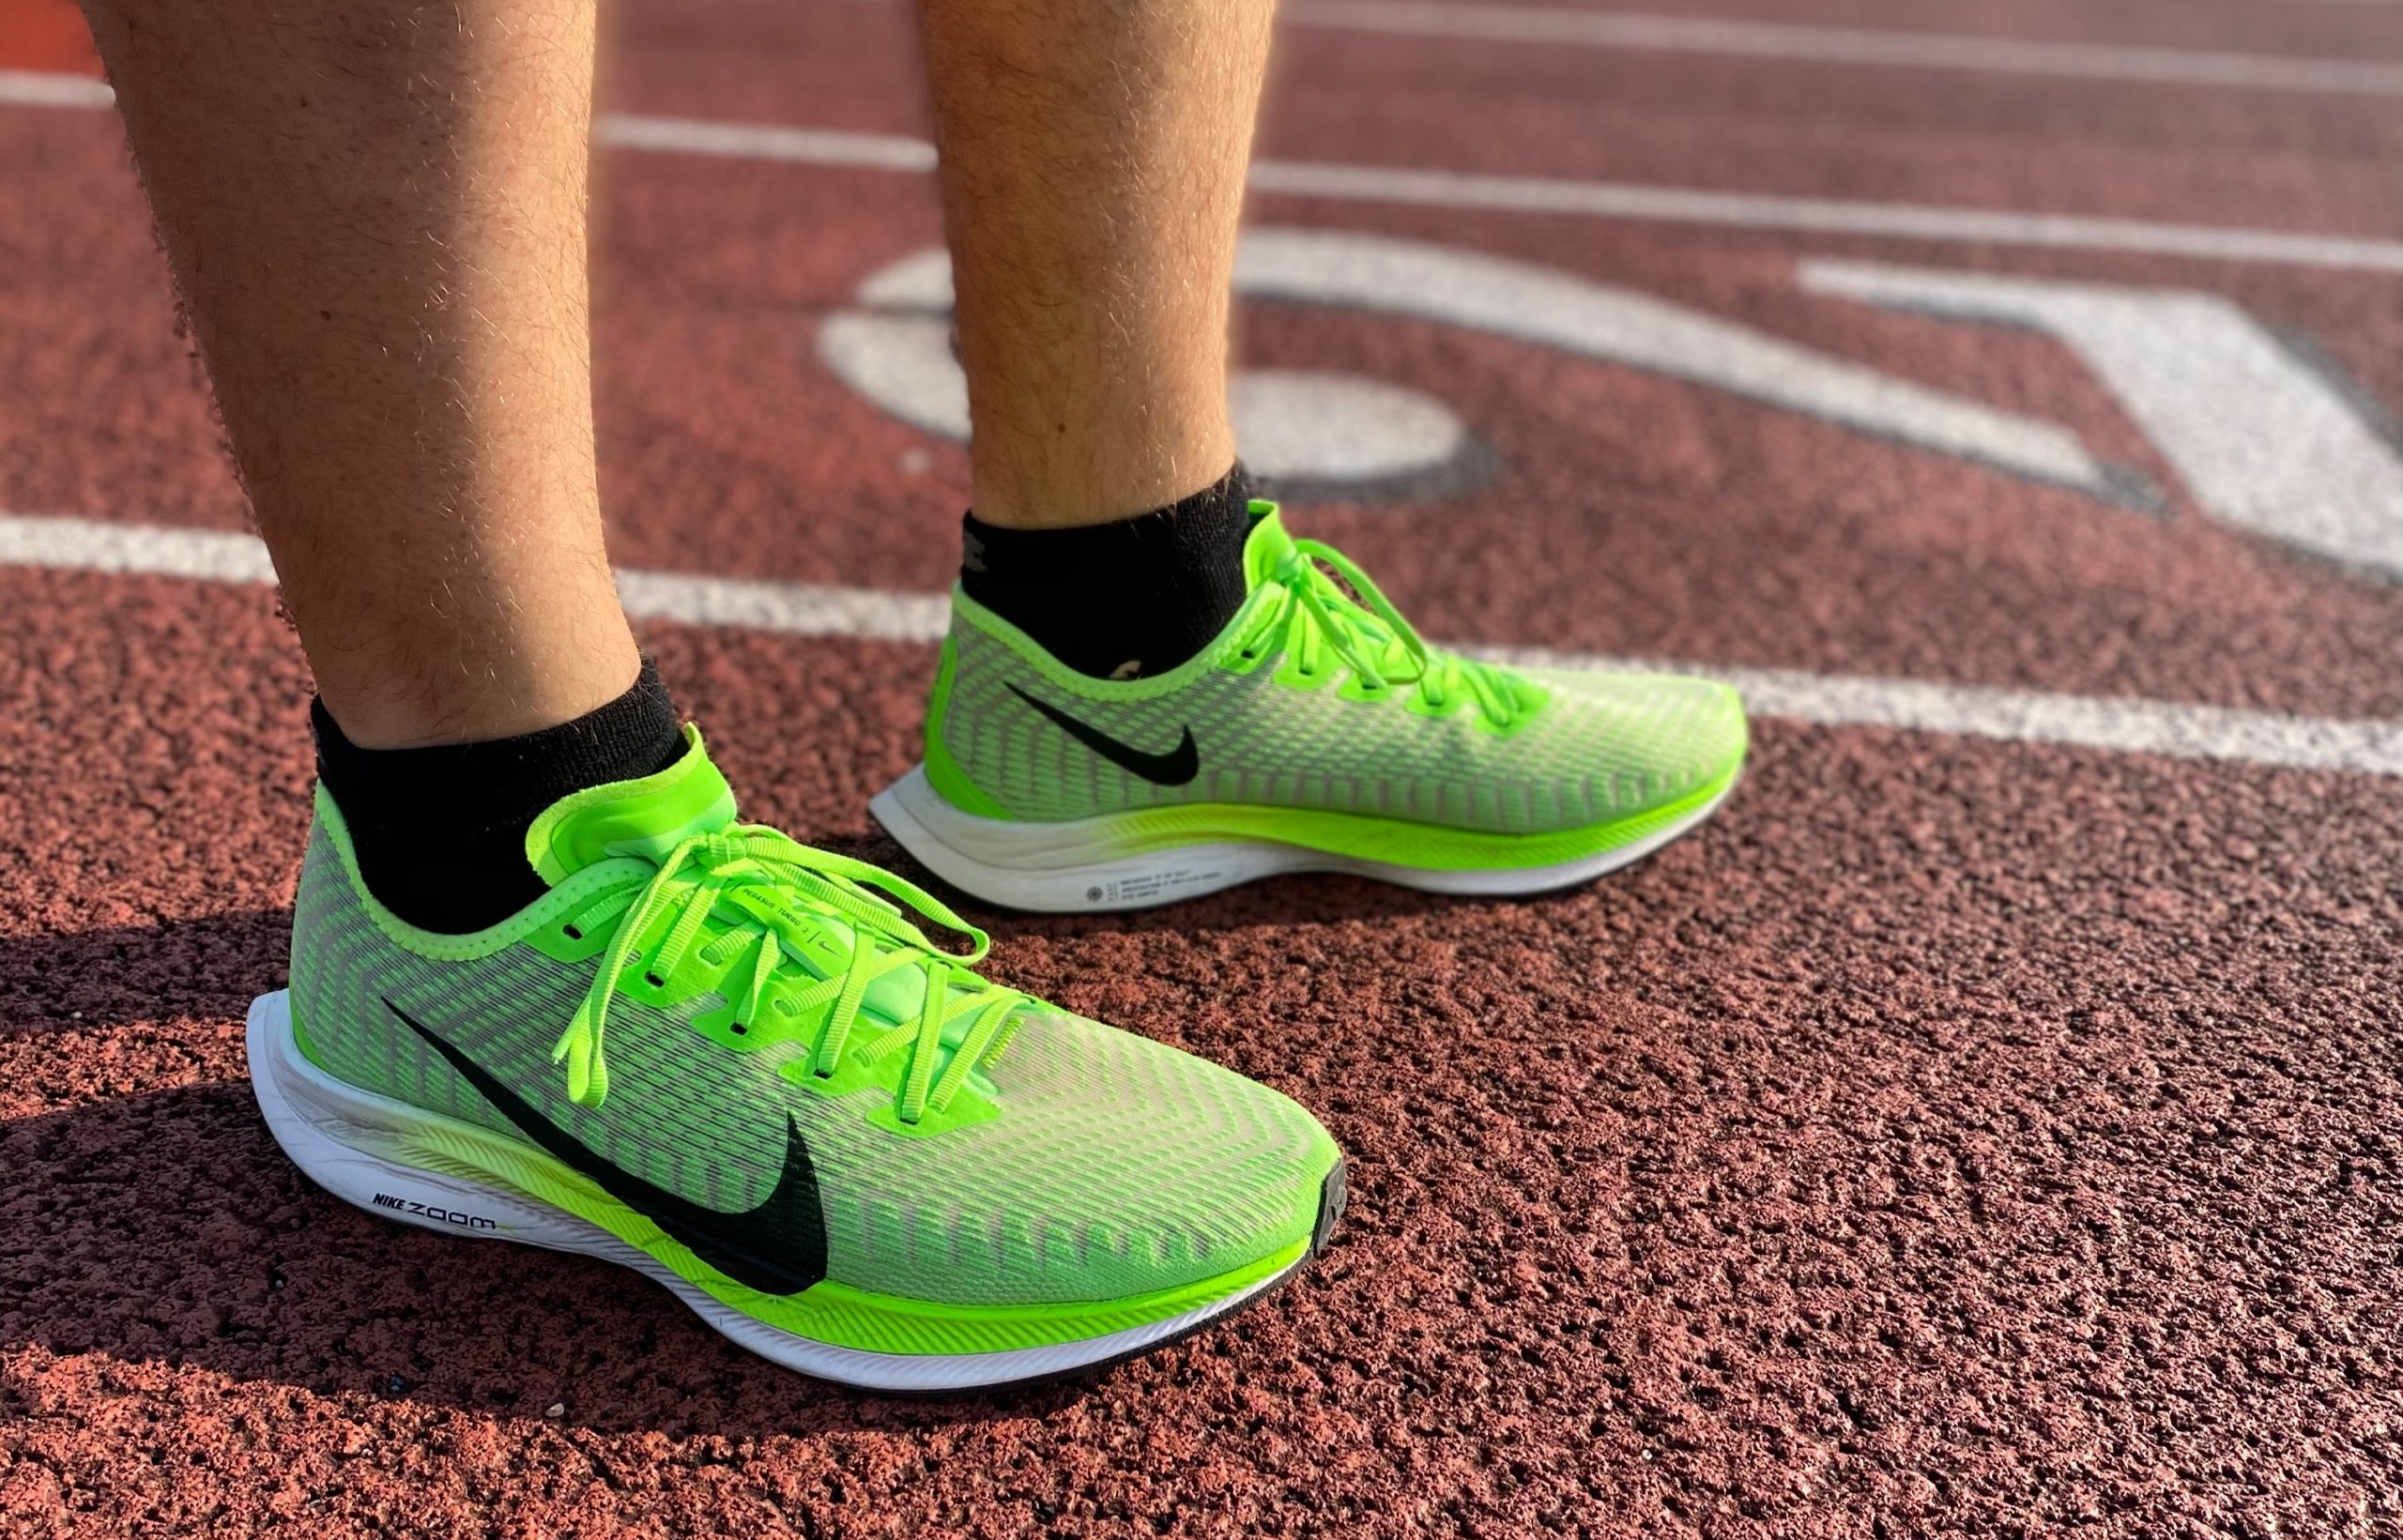 How to Pick the Best Pair of Running Shoes